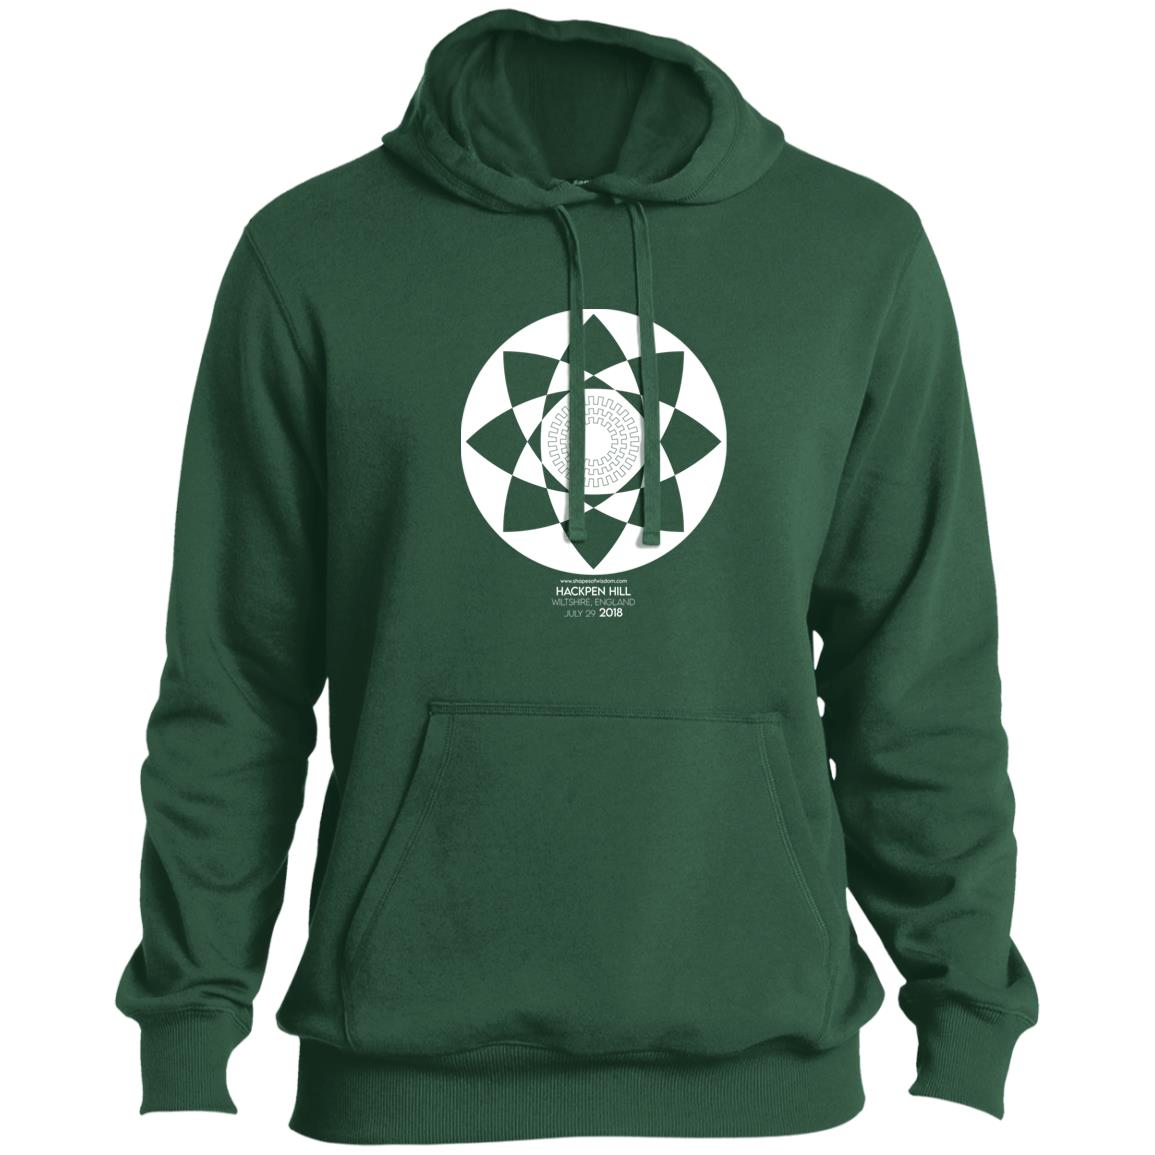 Crop Circle Pullover Hoodie - Hackpen Hill 3